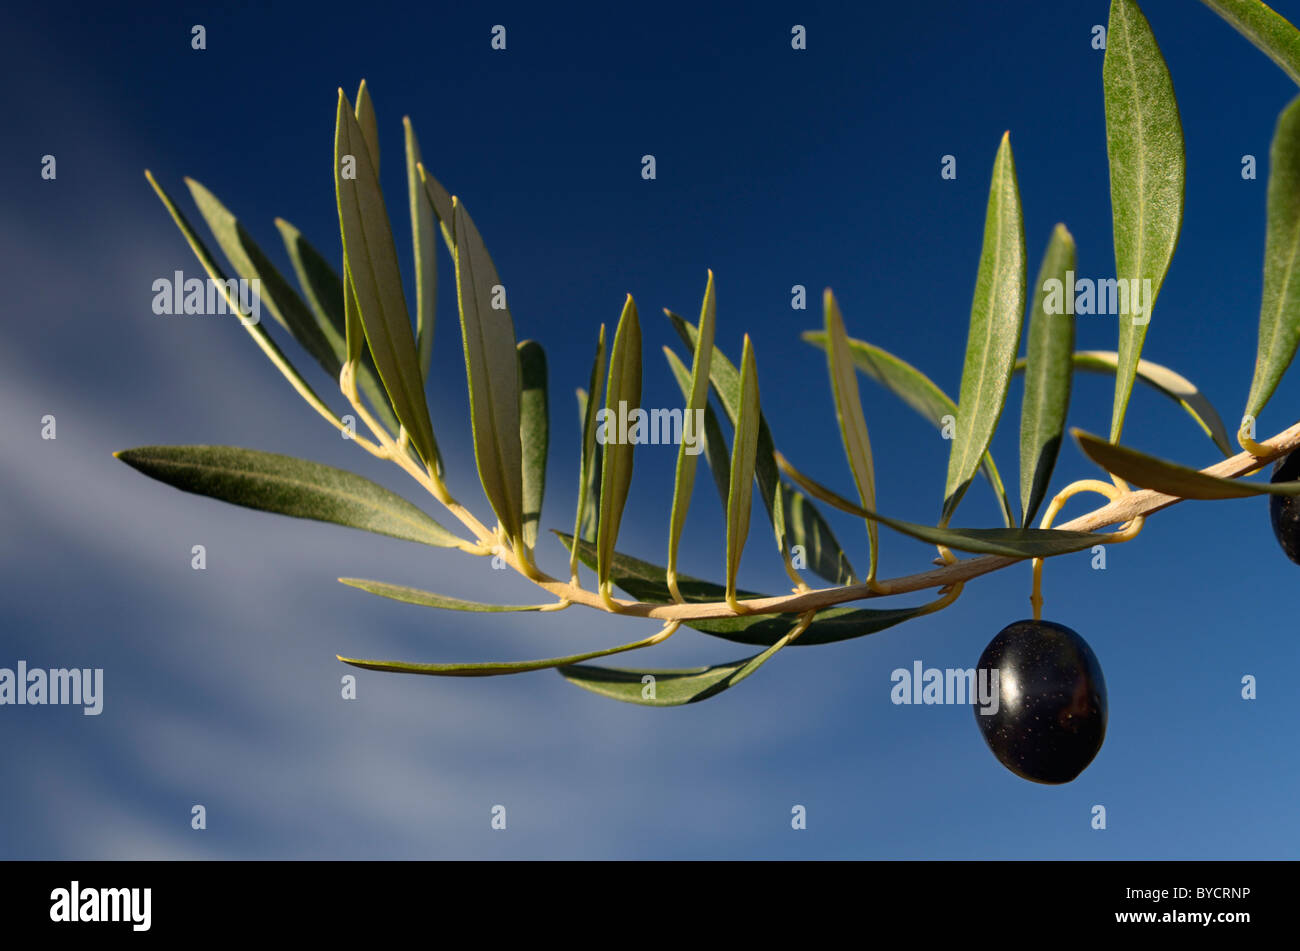 Ripe Olive on an Olive branch against blue sky in the Palm grove of Skoura oasis Morocco Stock Photo